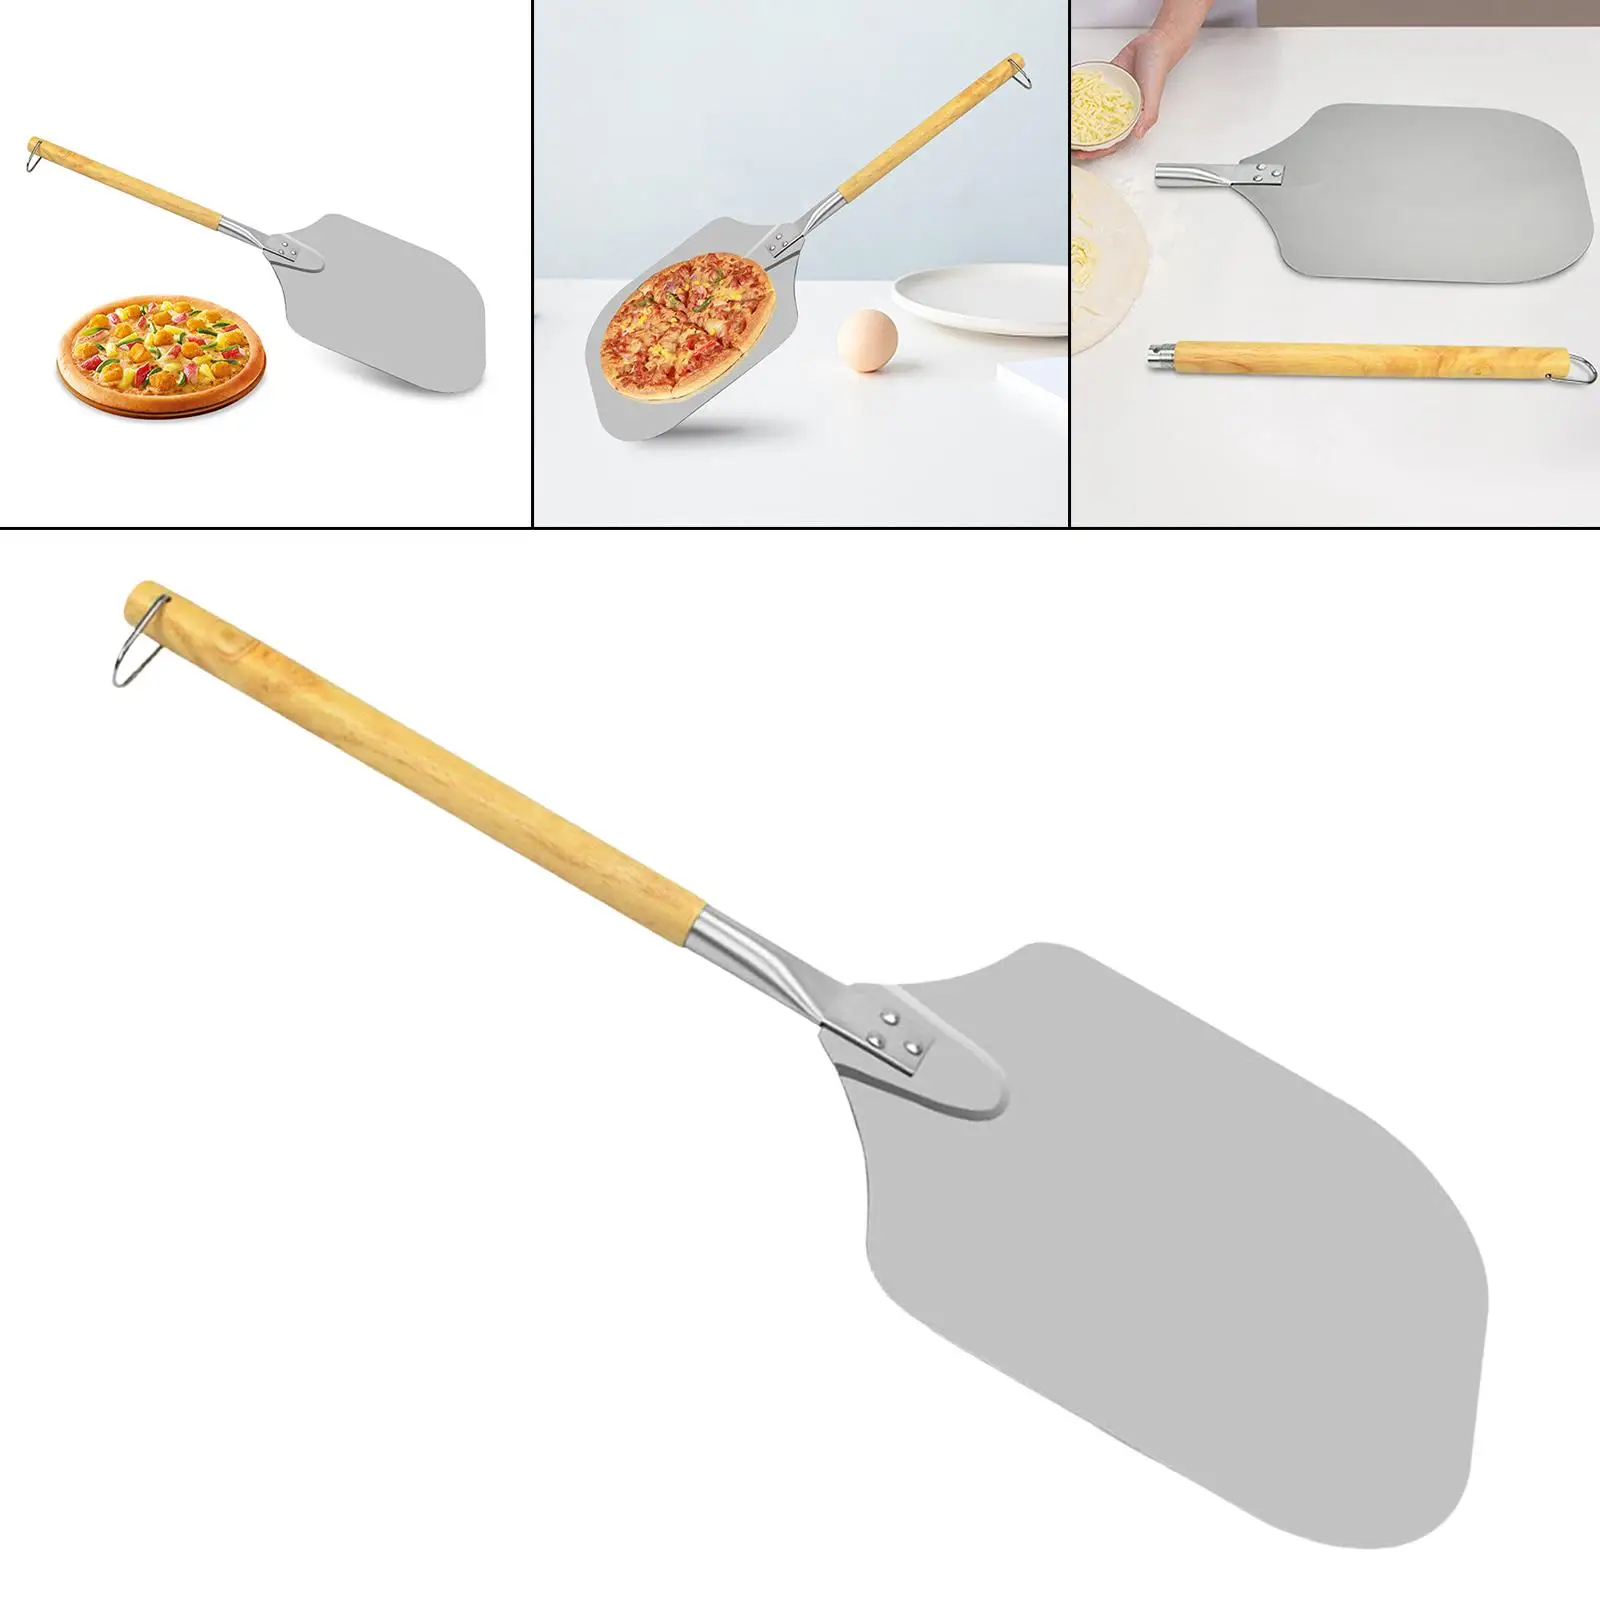 Multifunction Stainless Steel Pizza Peel Detachable Handle Pizza Shovel Kitchen Baking Tools Oven or Grill Use for Bread Pastry